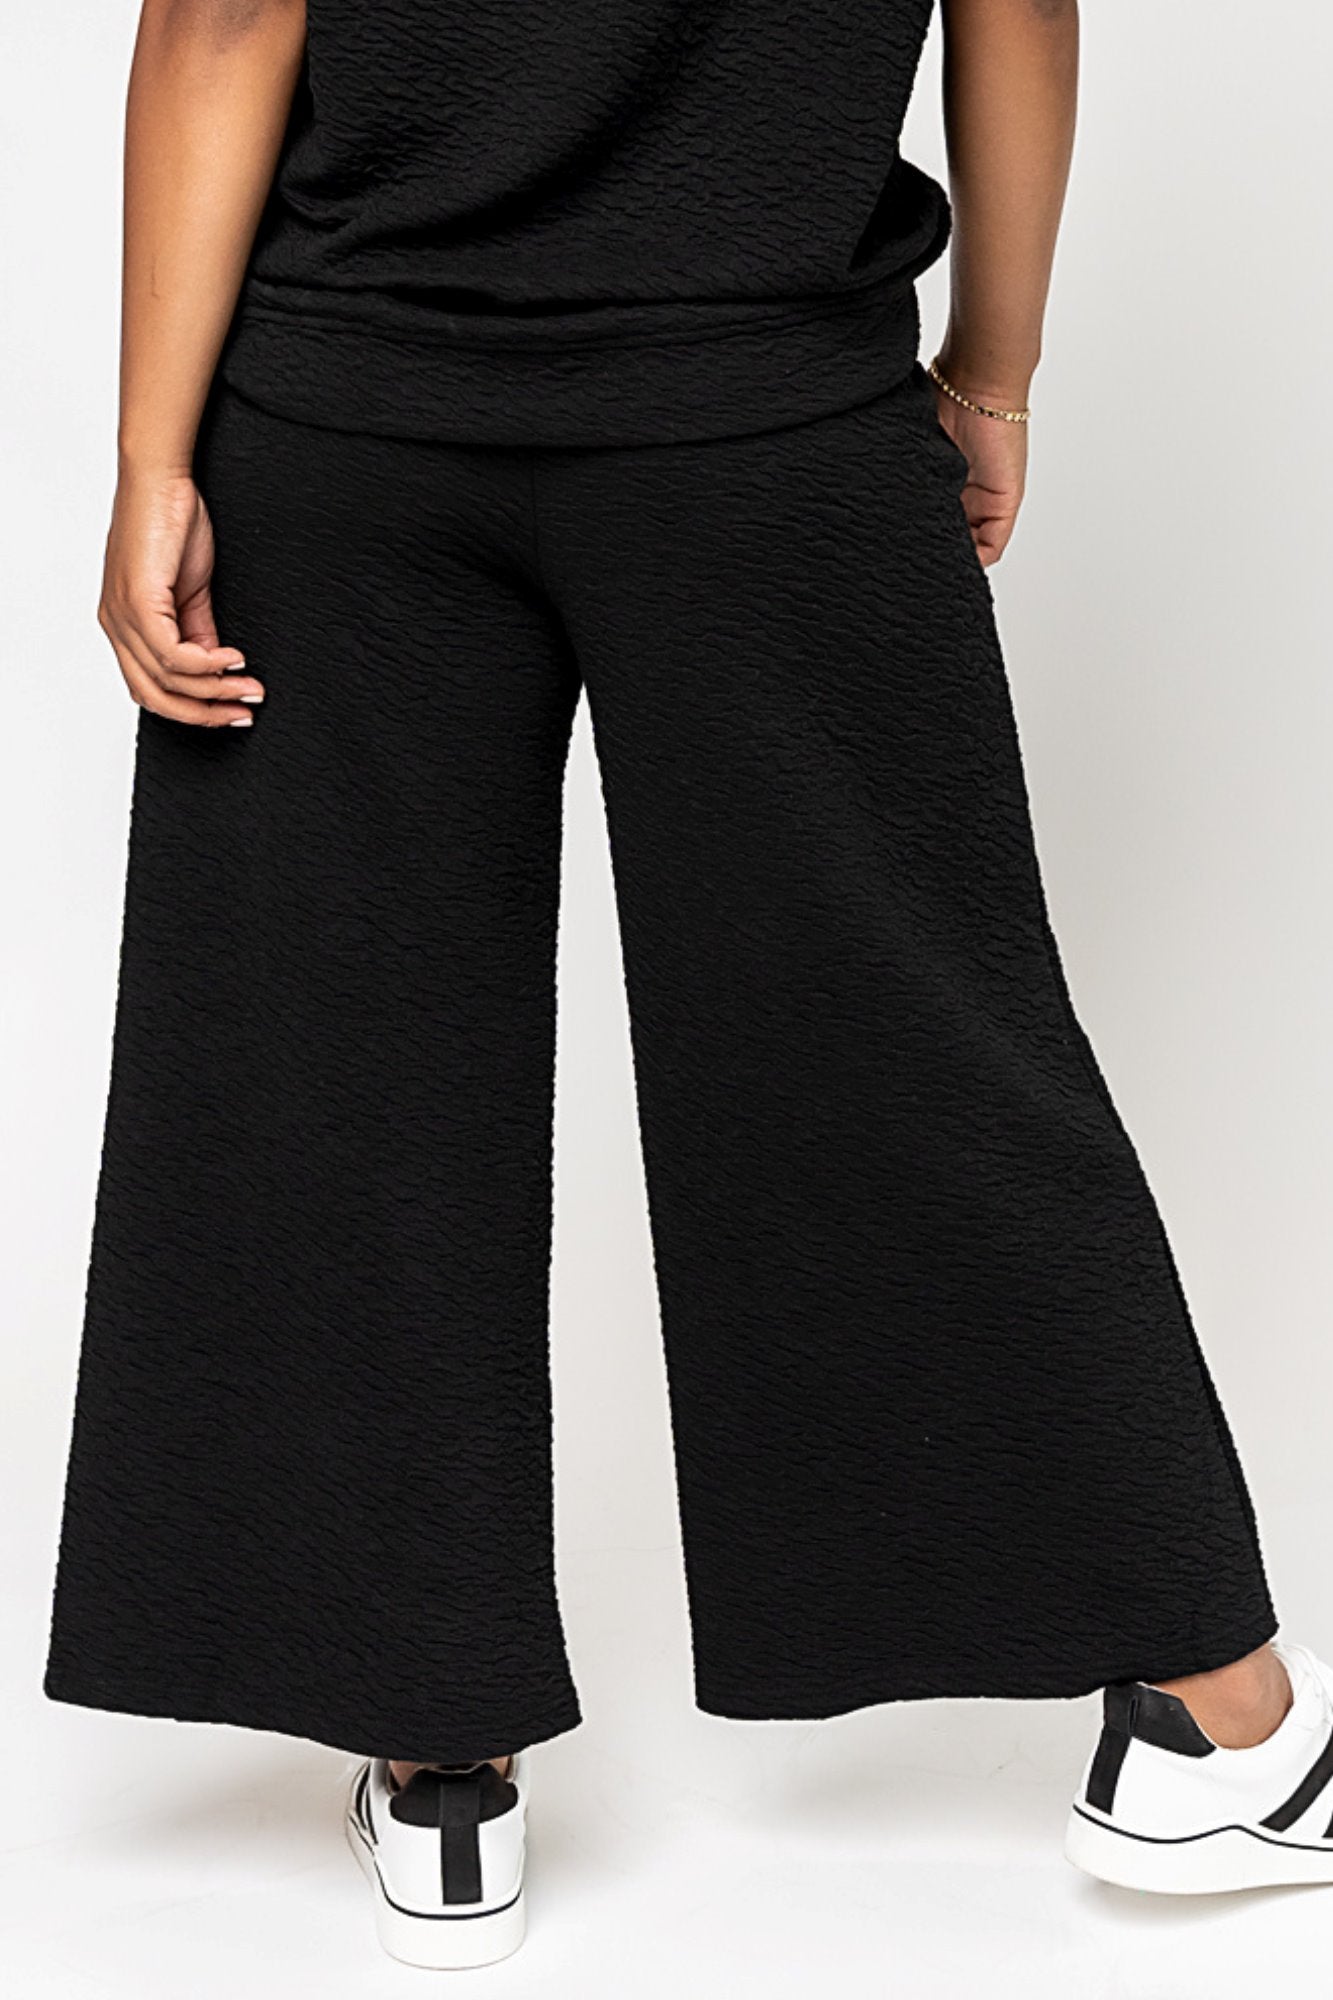 Gentry Pants Holley Girl 